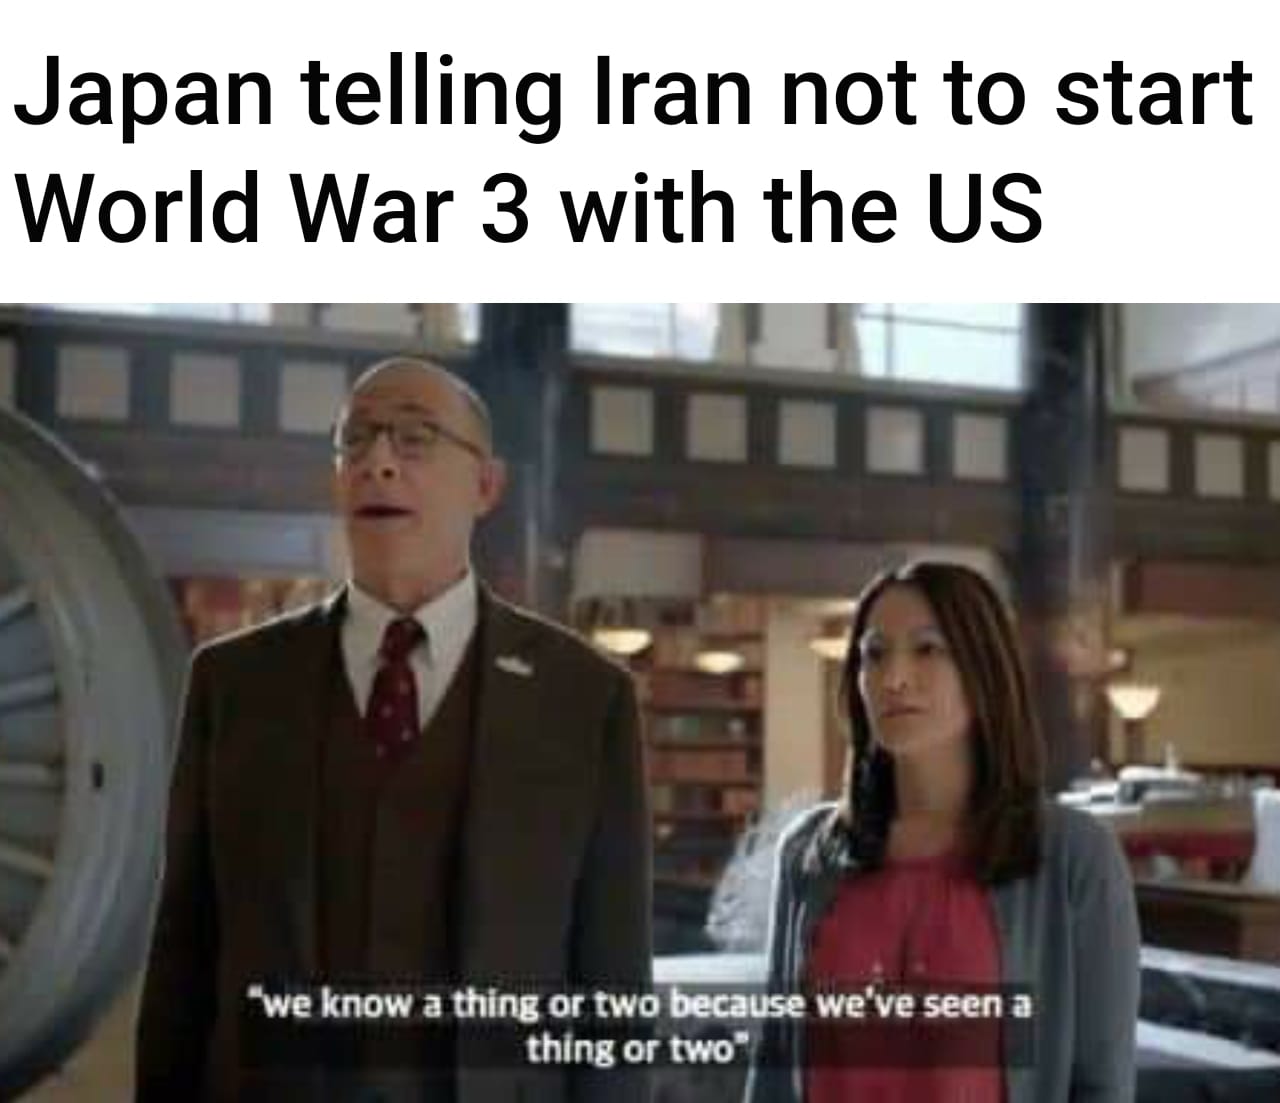 we know a thing or two meme - Japan telling Iran not to start World War 3 with the Us "we know a thing or two because we've seen a thing or two